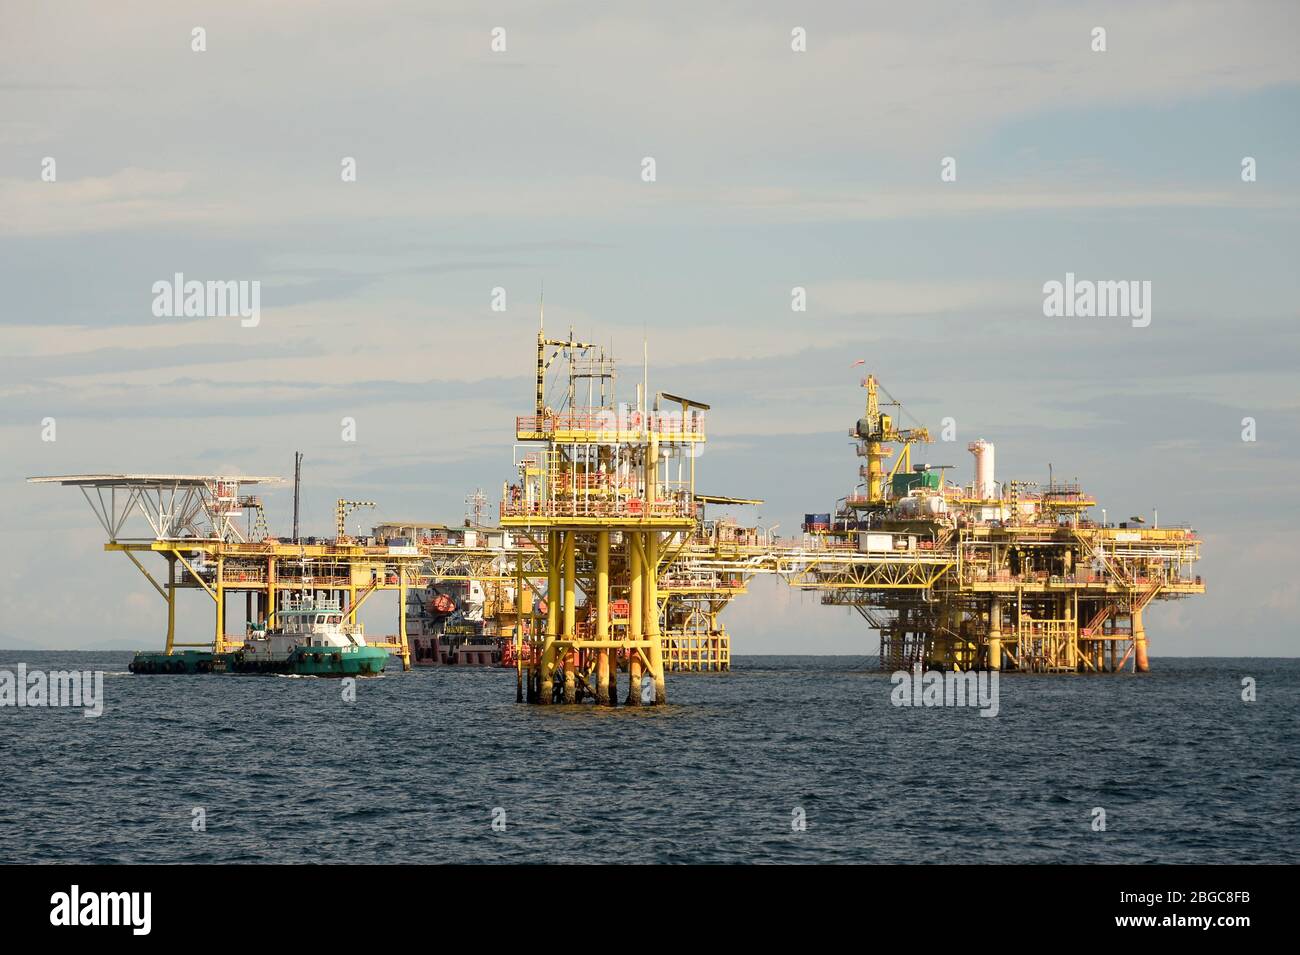 accommodation work boat attach to oil platform at sea form scheduled maintenance Stock Photo